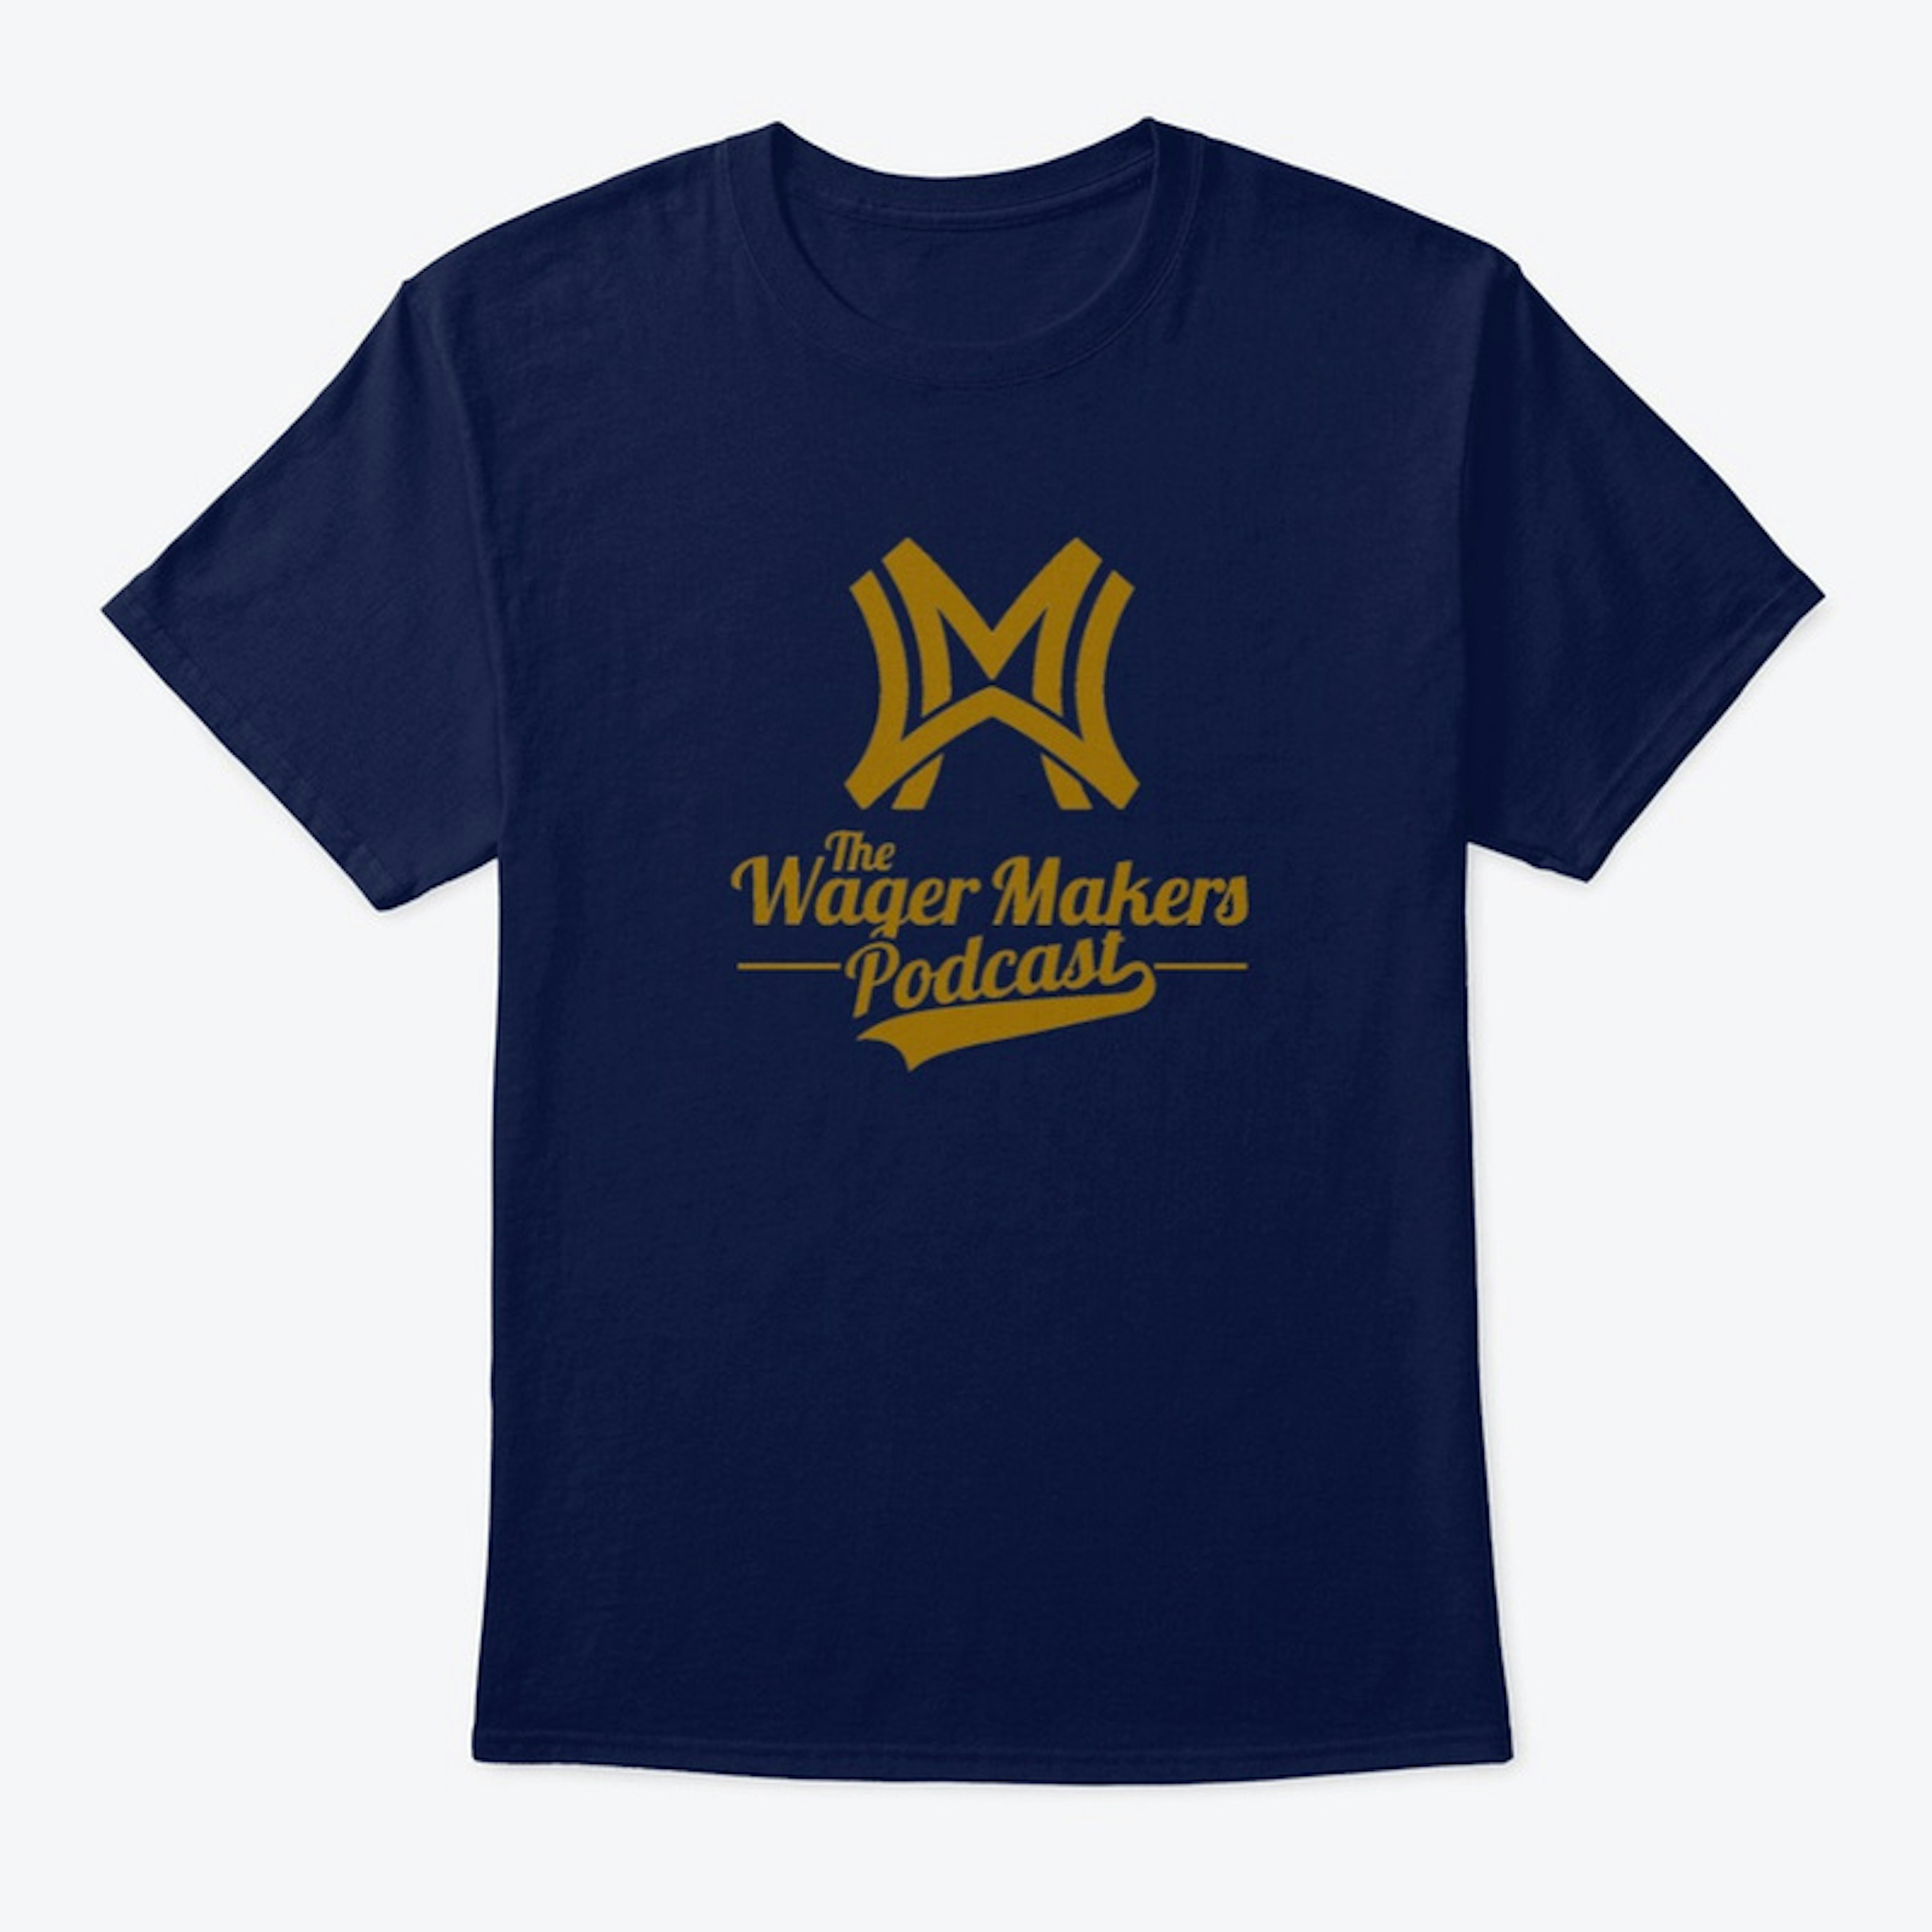 CLASSIC NAVY AND GOLD WM T